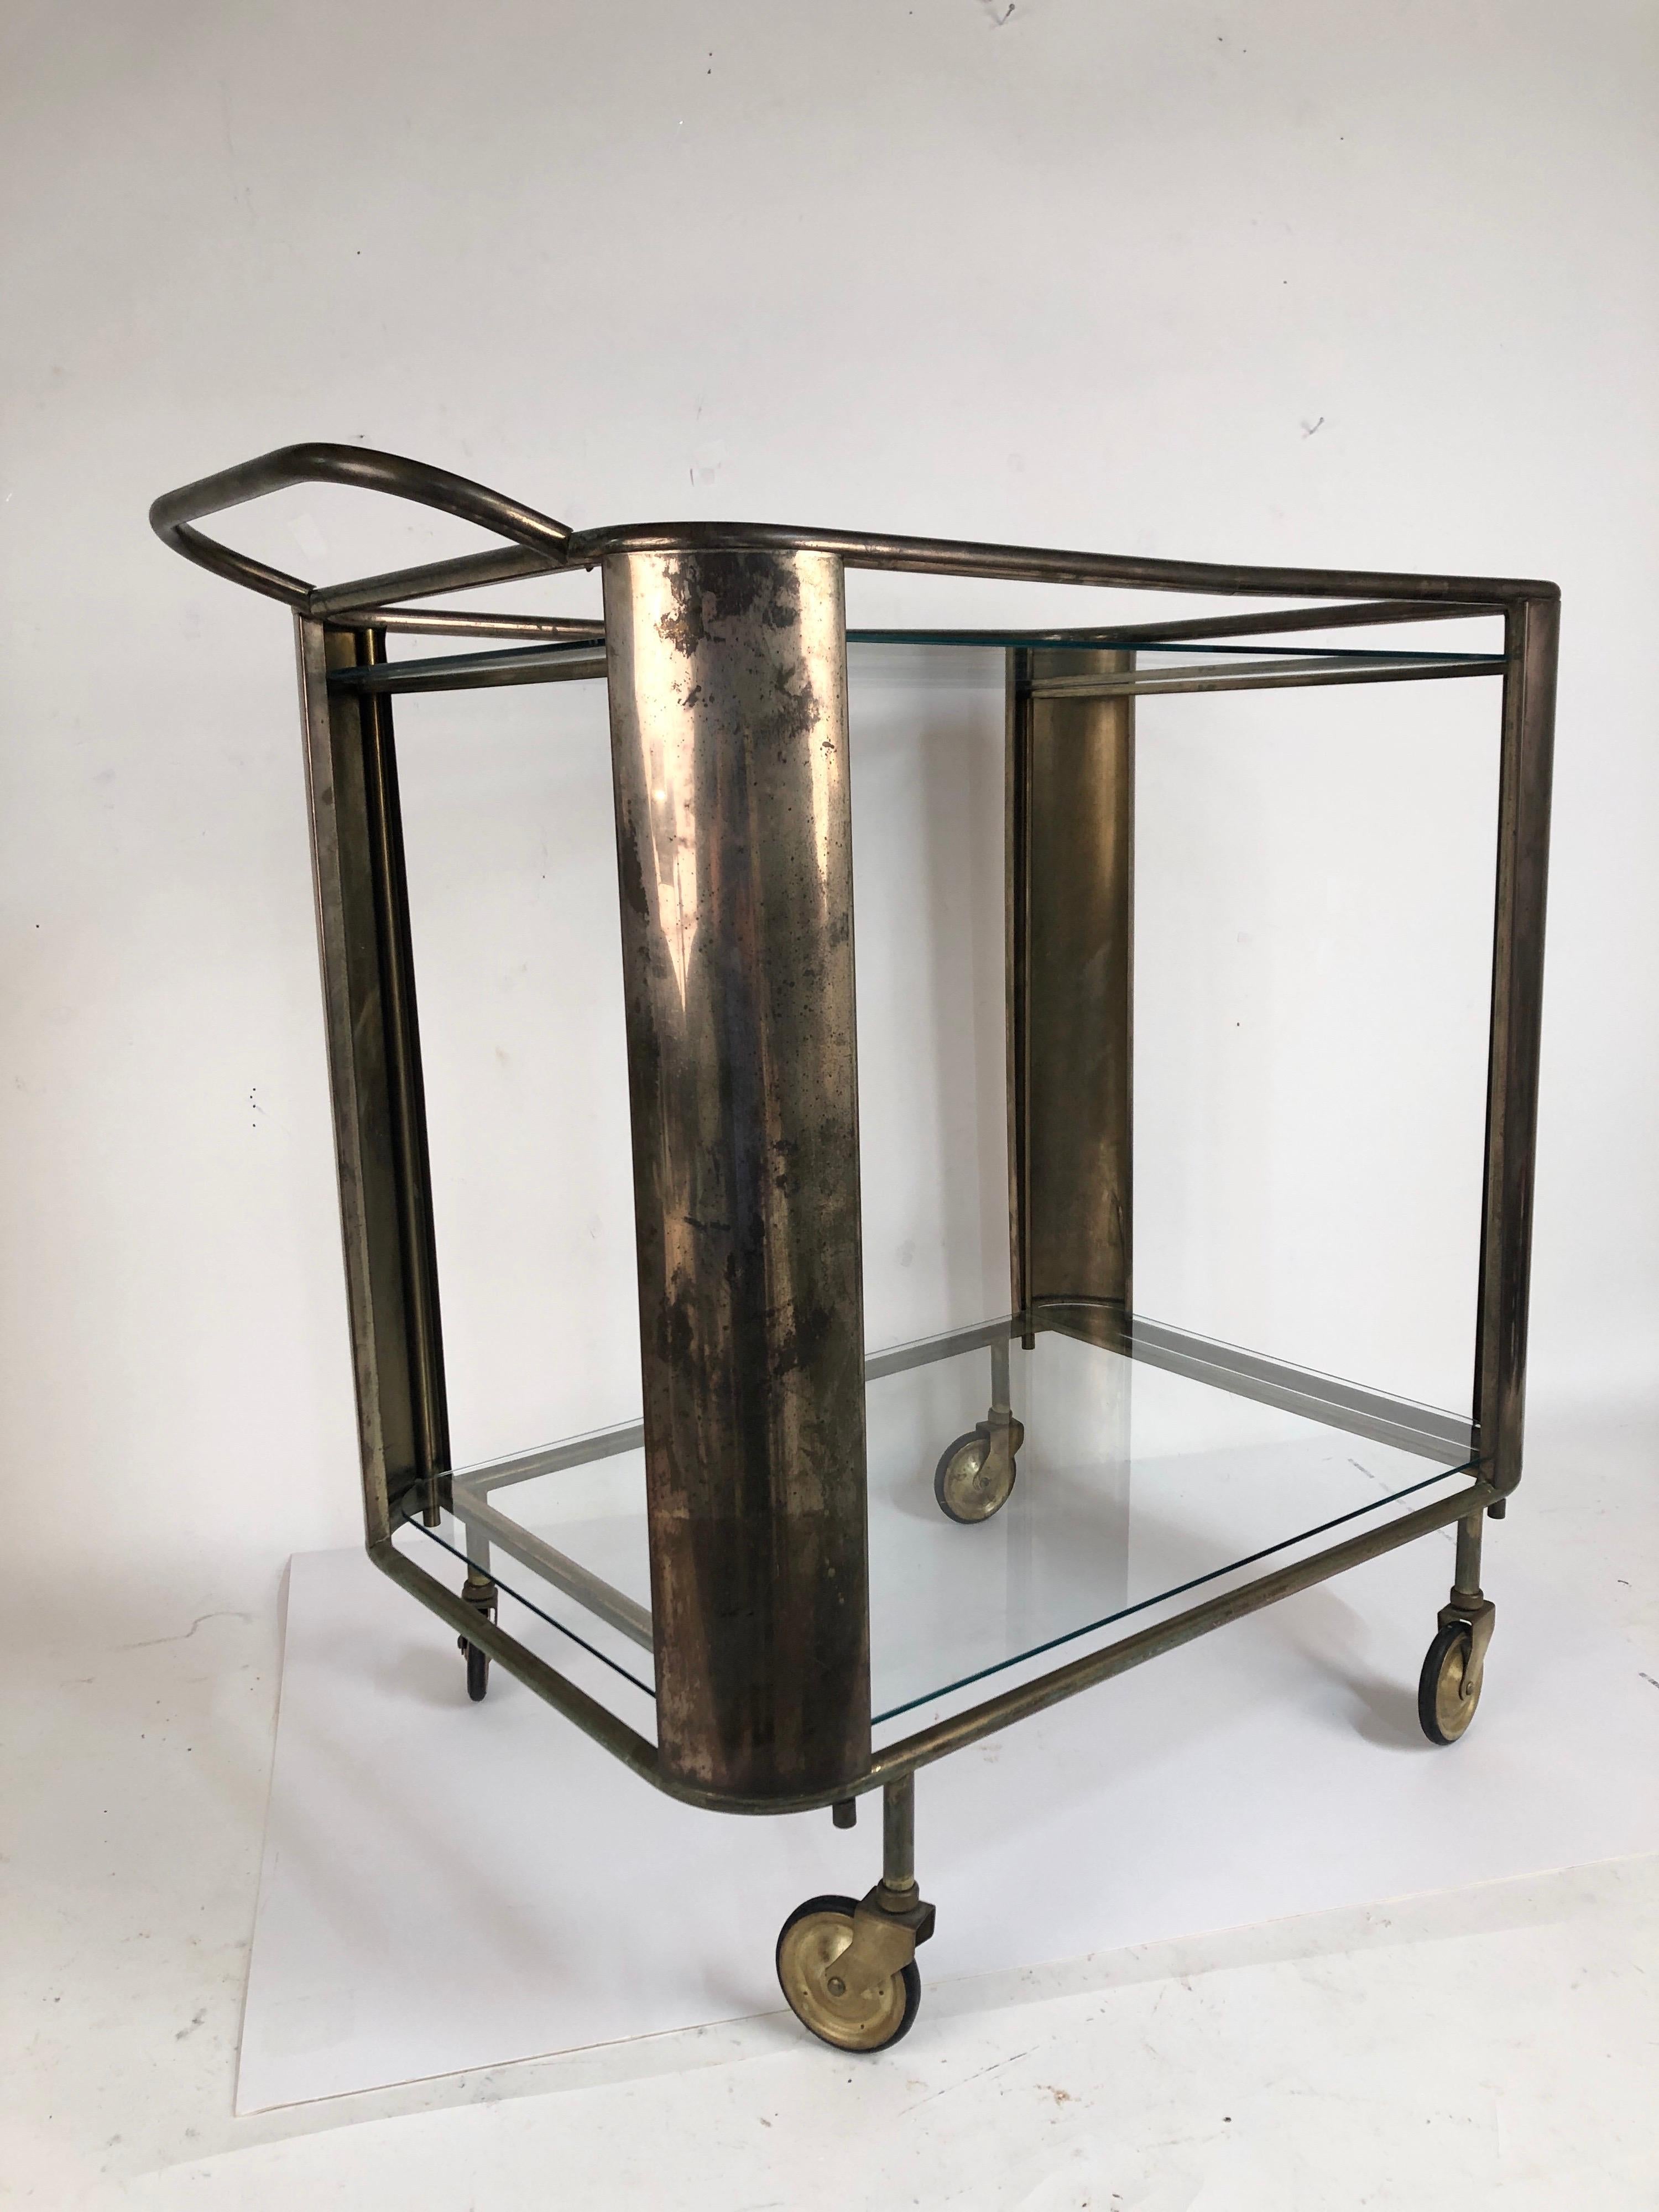 A nice Mid-Century Modern brass bar cart with two glass shelves and nice decorative wheels. Untouched patina surface.